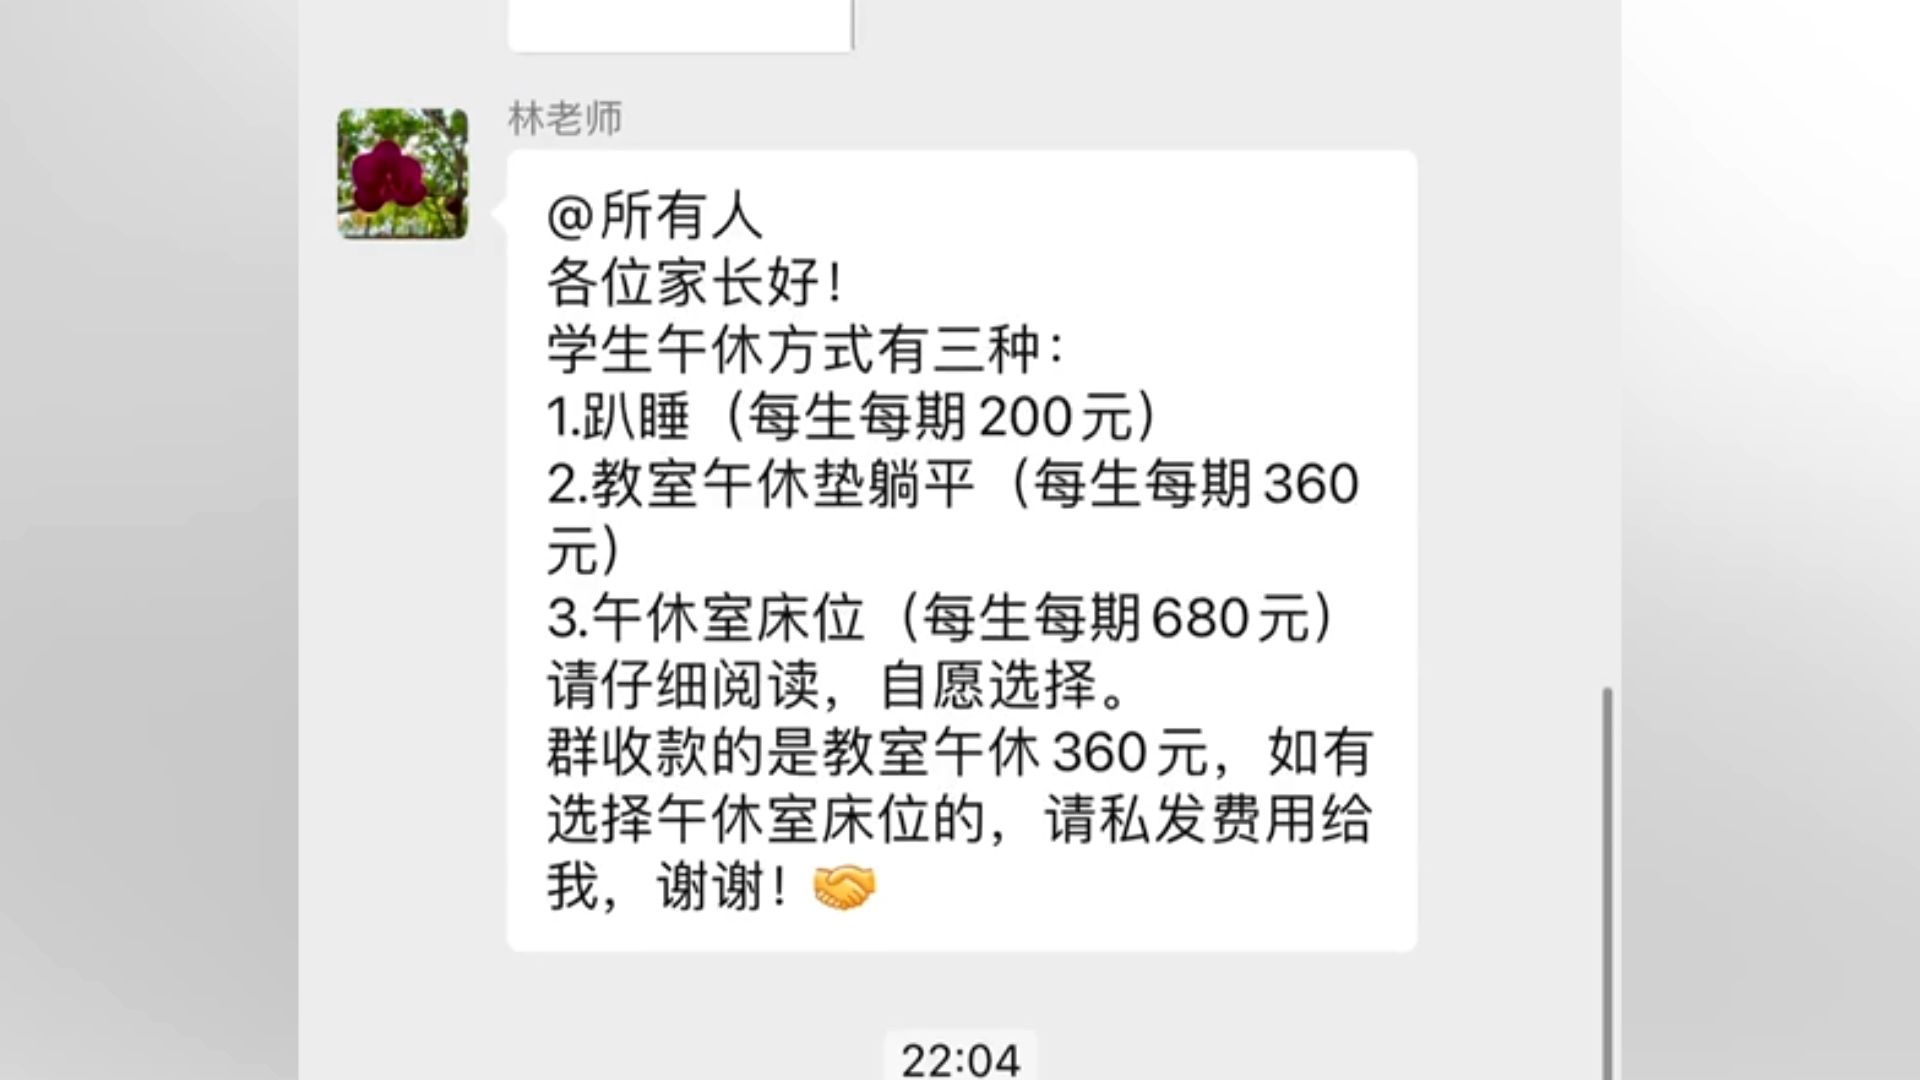 The school and government hotlines have responded that students from a certain school in Dongguan will be charged 200 yuan for a semester of lunch break while lying at their desks